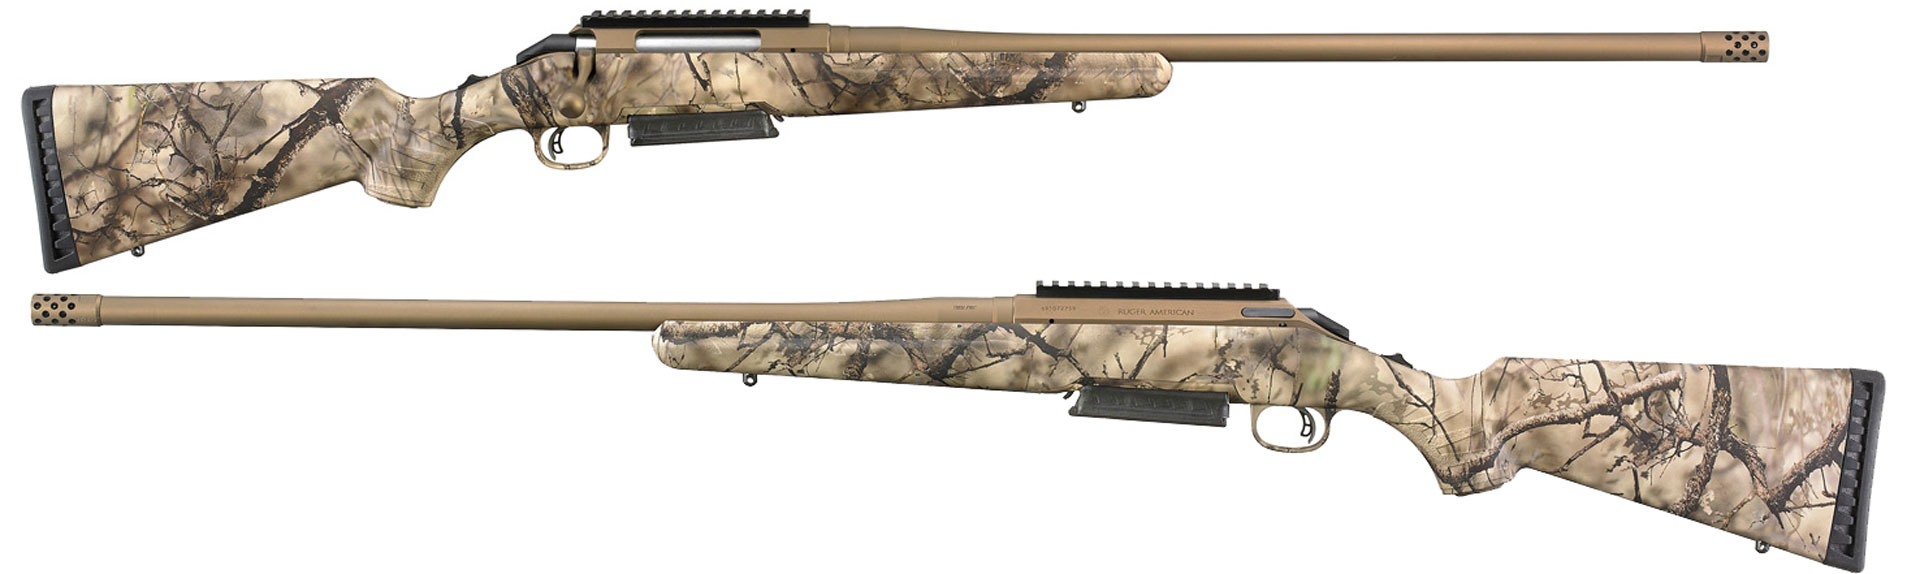 Ruger American GO Wild Camo Right and Left